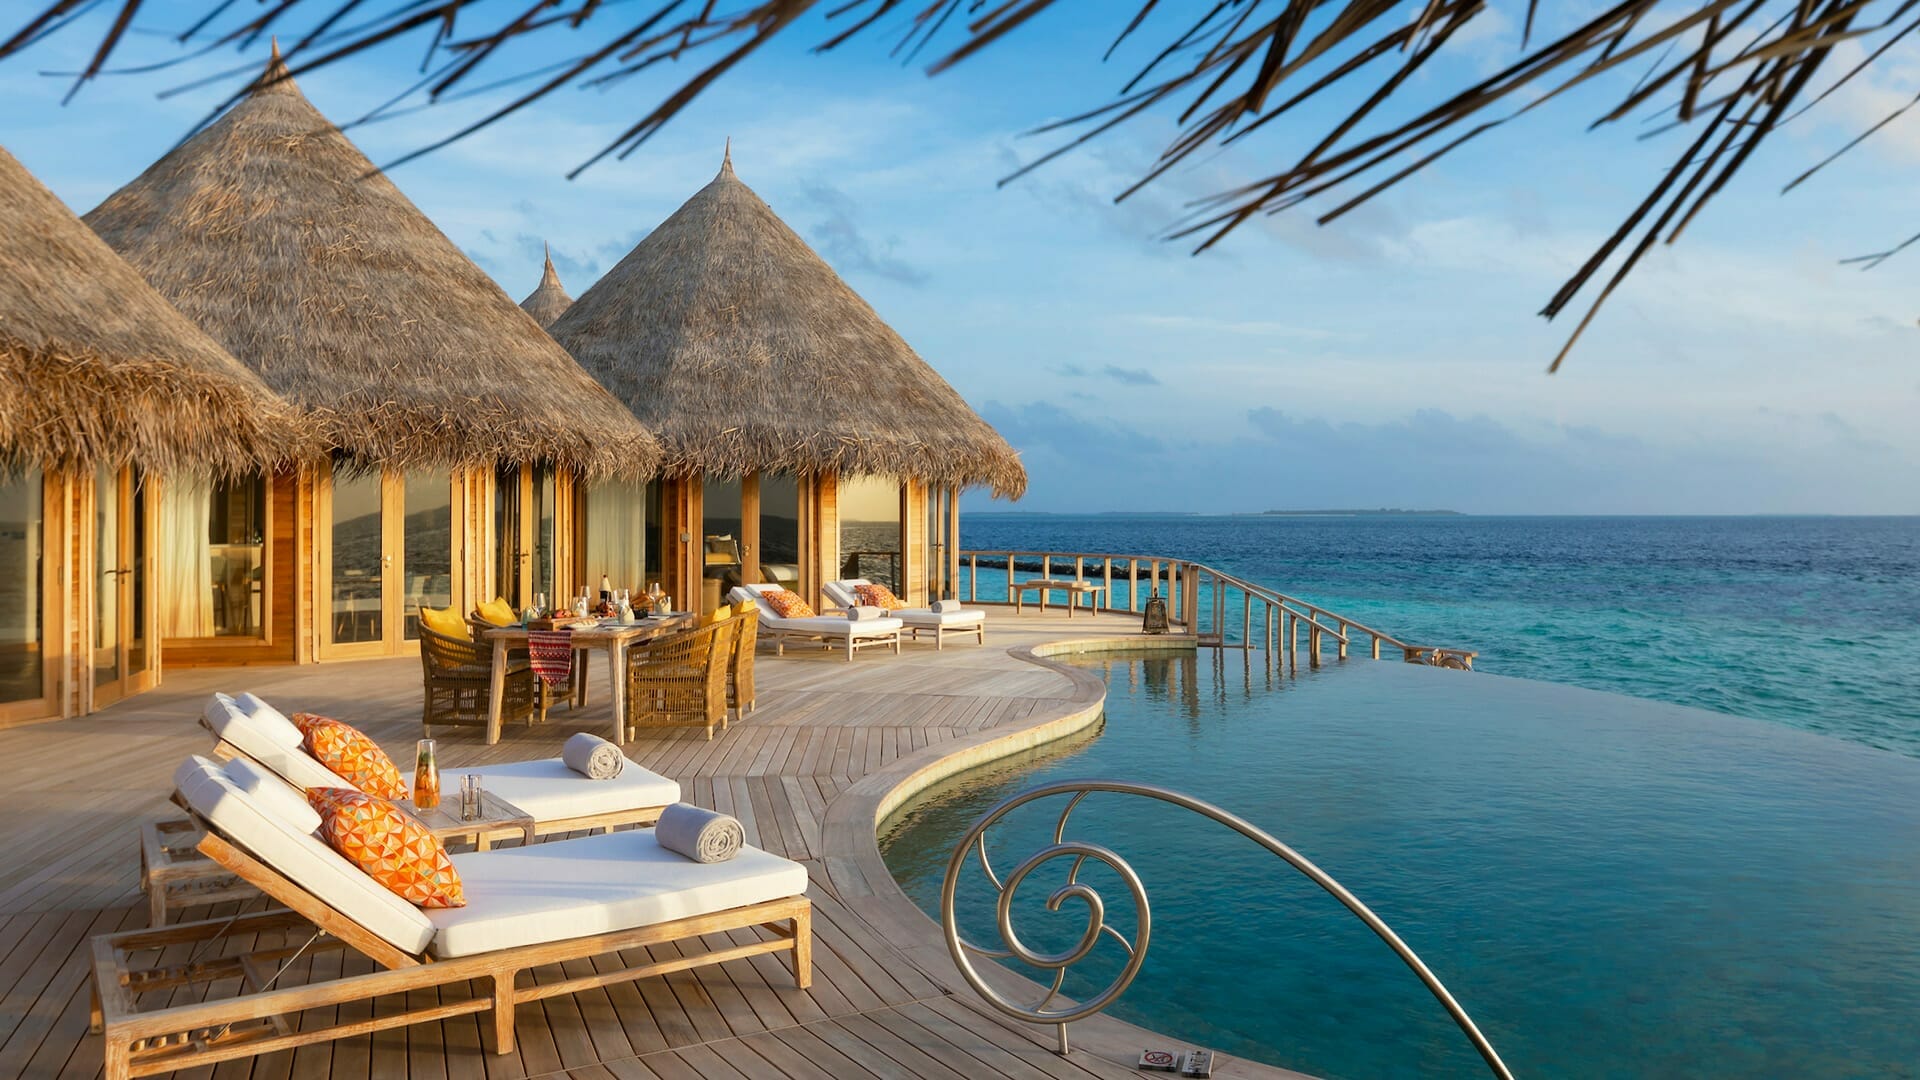 The Nautilus Beach & Ocean Houses Maldives: A World of Your Own Making